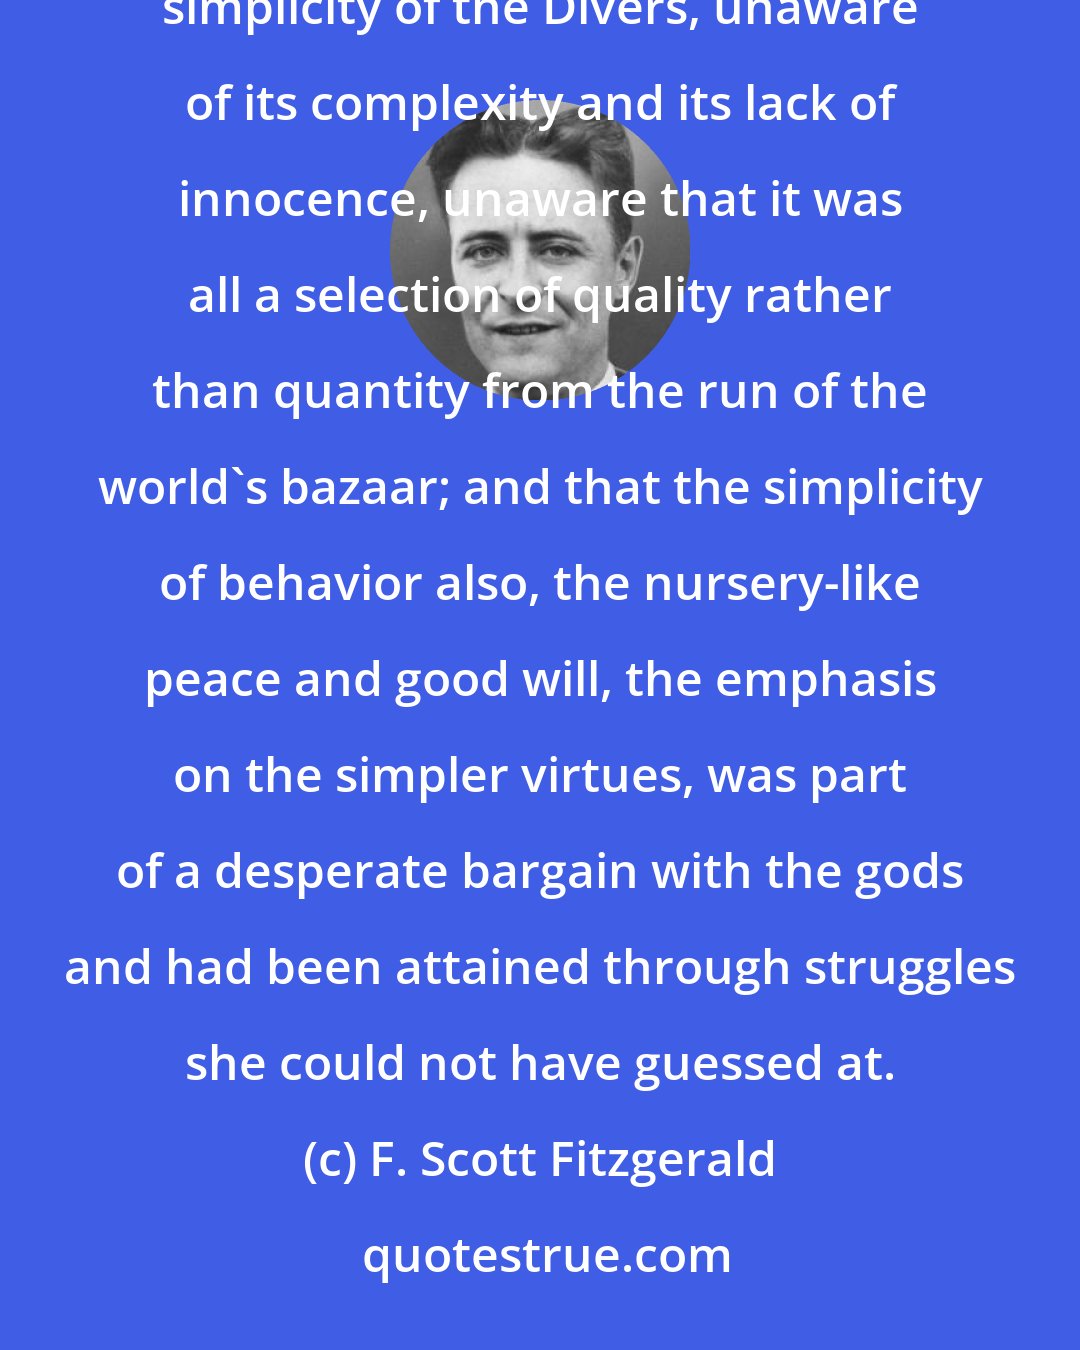 F. Scott Fitzgerald: Rosemary bubbled with delight at the trunks. Her naivete responded whole-heartedly to the expensive simplicity of the Divers, unaware of its complexity and its lack of innocence, unaware that it was all a selection of quality rather than quantity from the run of the world's bazaar; and that the simplicity of behavior also, the nursery-like peace and good will, the emphasis on the simpler virtues, was part of a desperate bargain with the gods and had been attained through struggles she could not have guessed at.